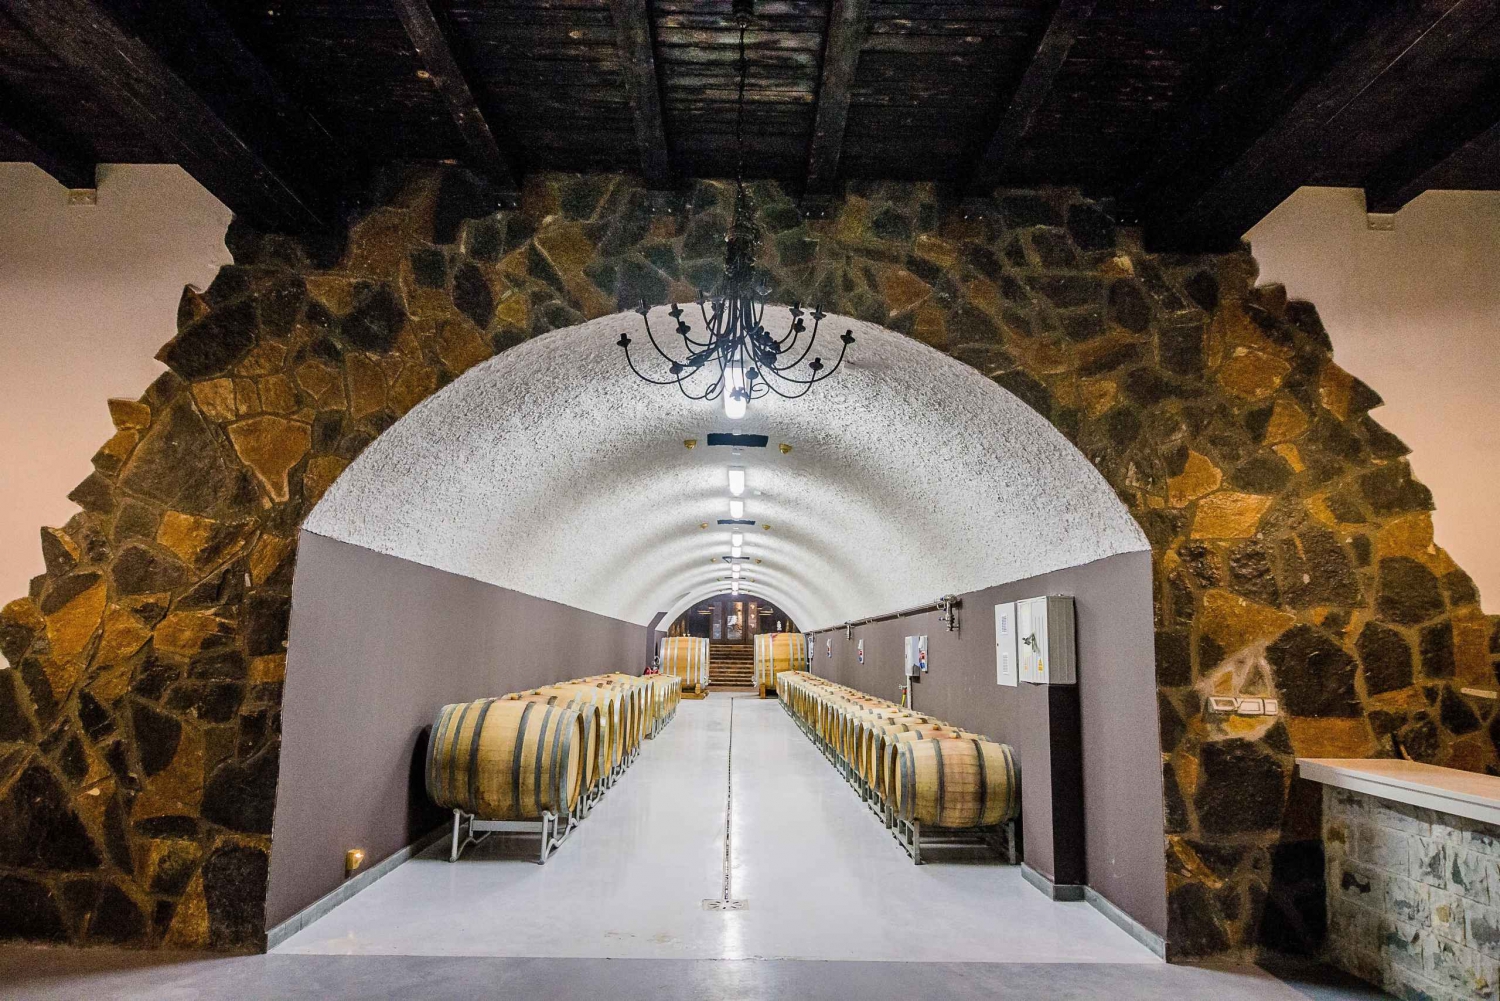 Winery Tour and Tasting at Winery Lipovac